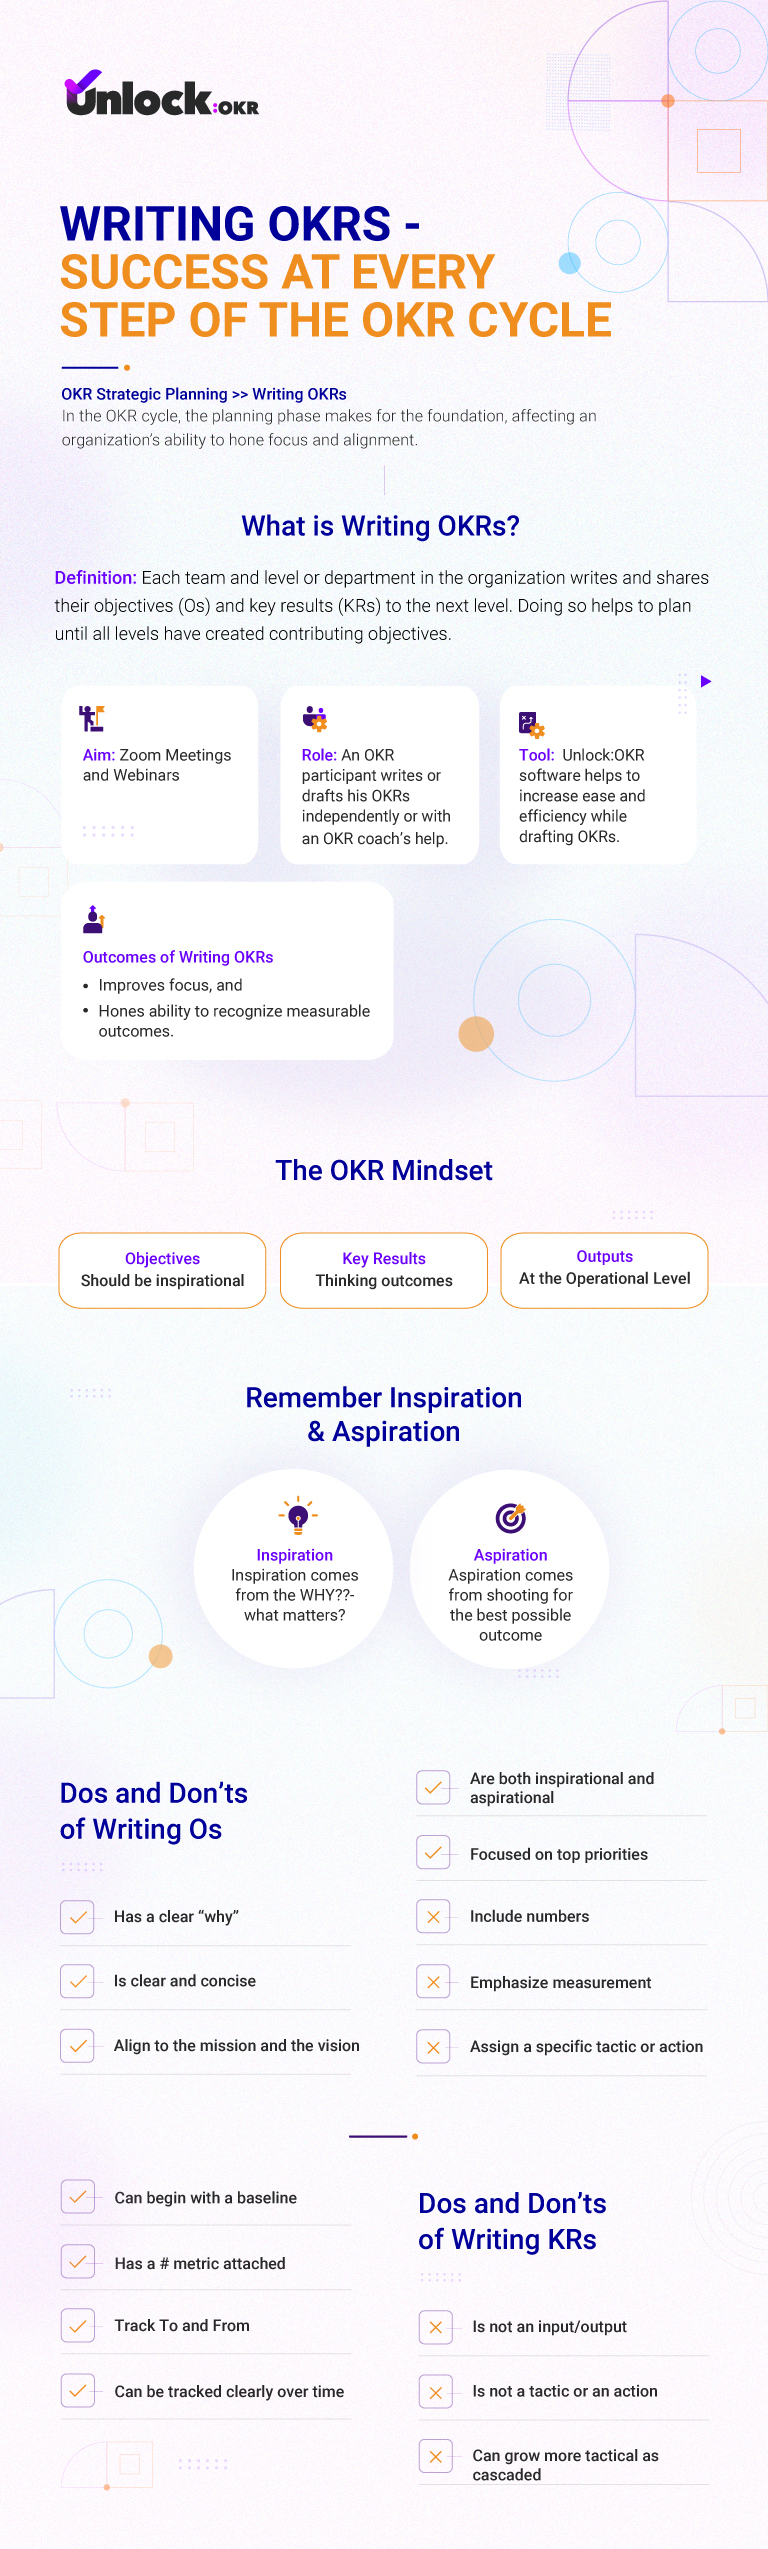 Writing-OKRs---Success-at-Every-Step-of-the-OKR-Cycle